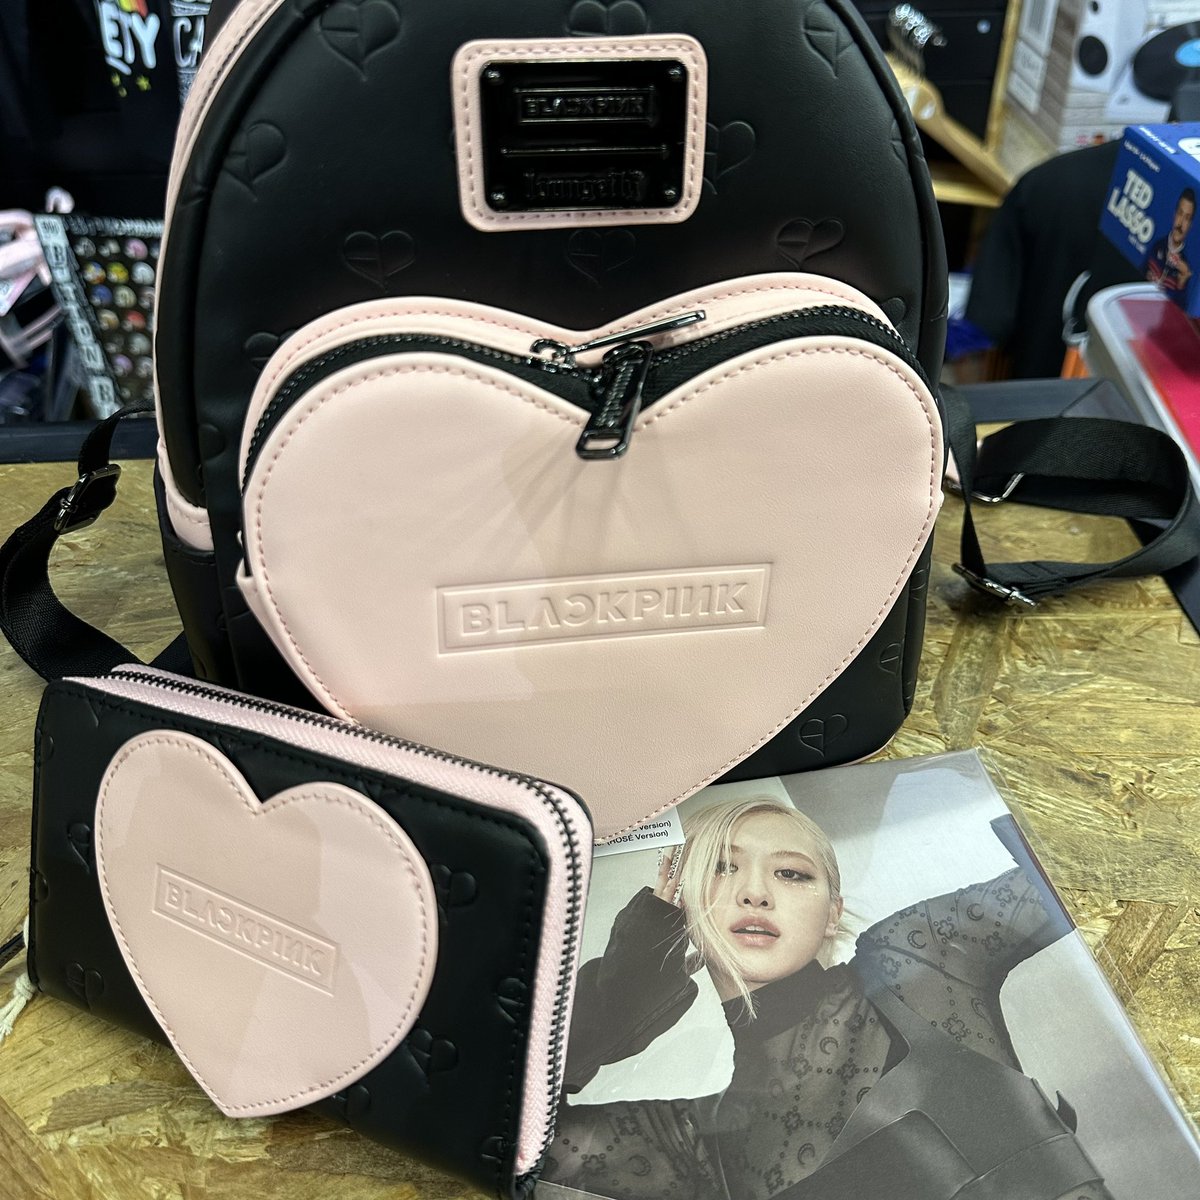 Blackpink in your area! New loungefly bags are in! 🩷 #blackpink #loungefly #bp